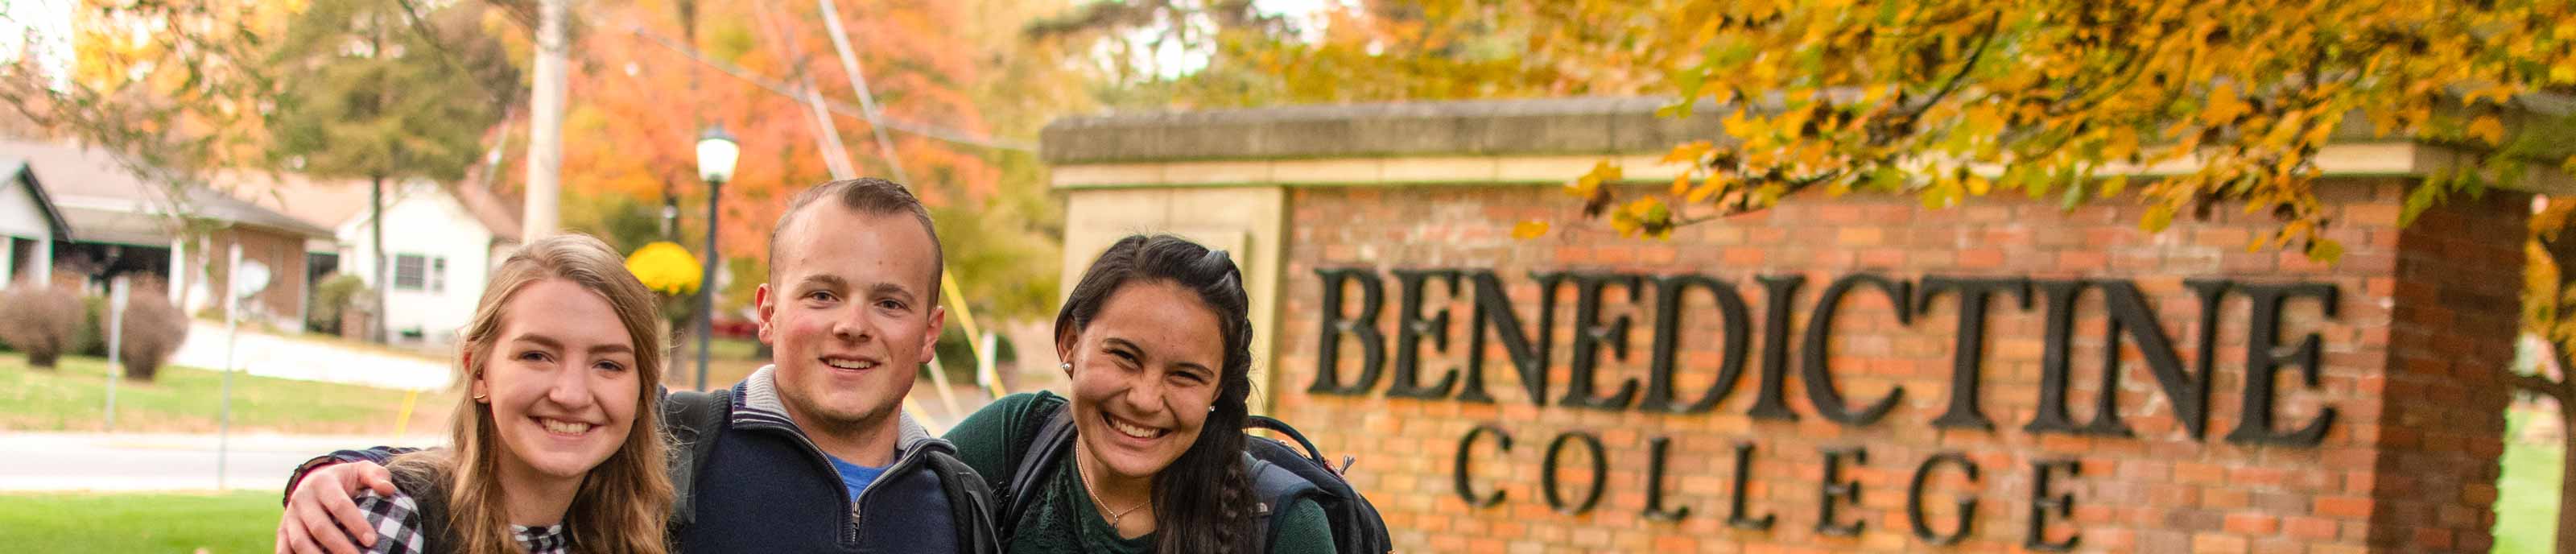 Three students pose for a photo in front of the Benedictine College entrance sign